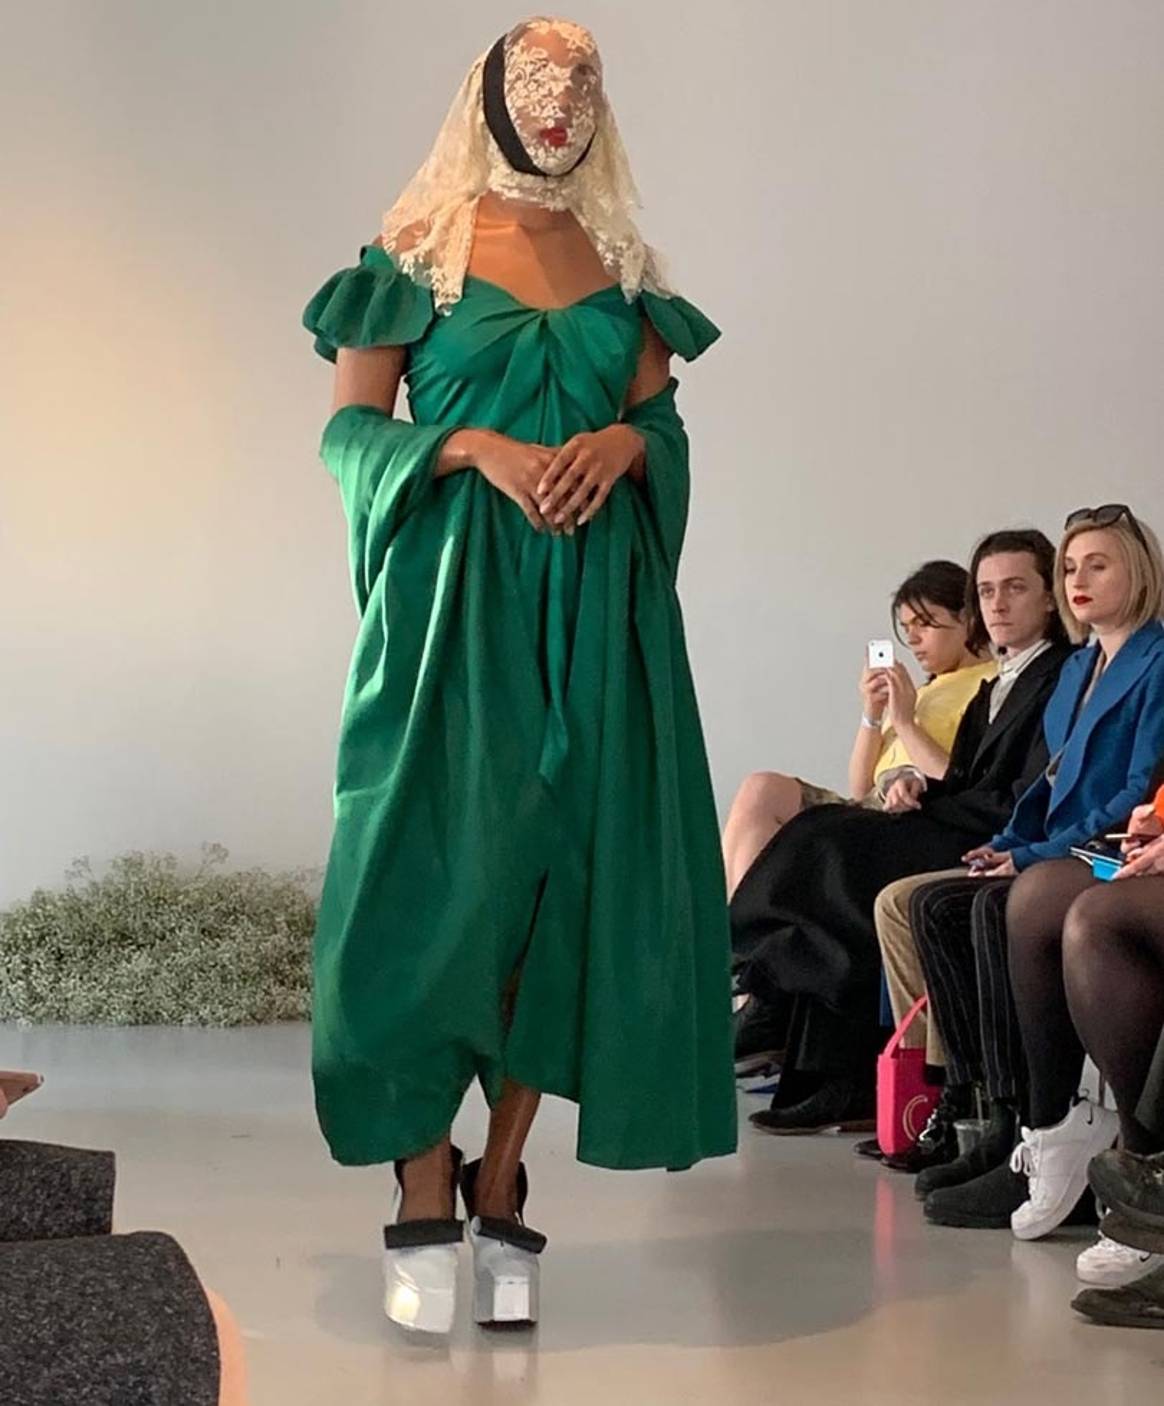 Gogo Graham’s AW19 femme fatale is softly powerful